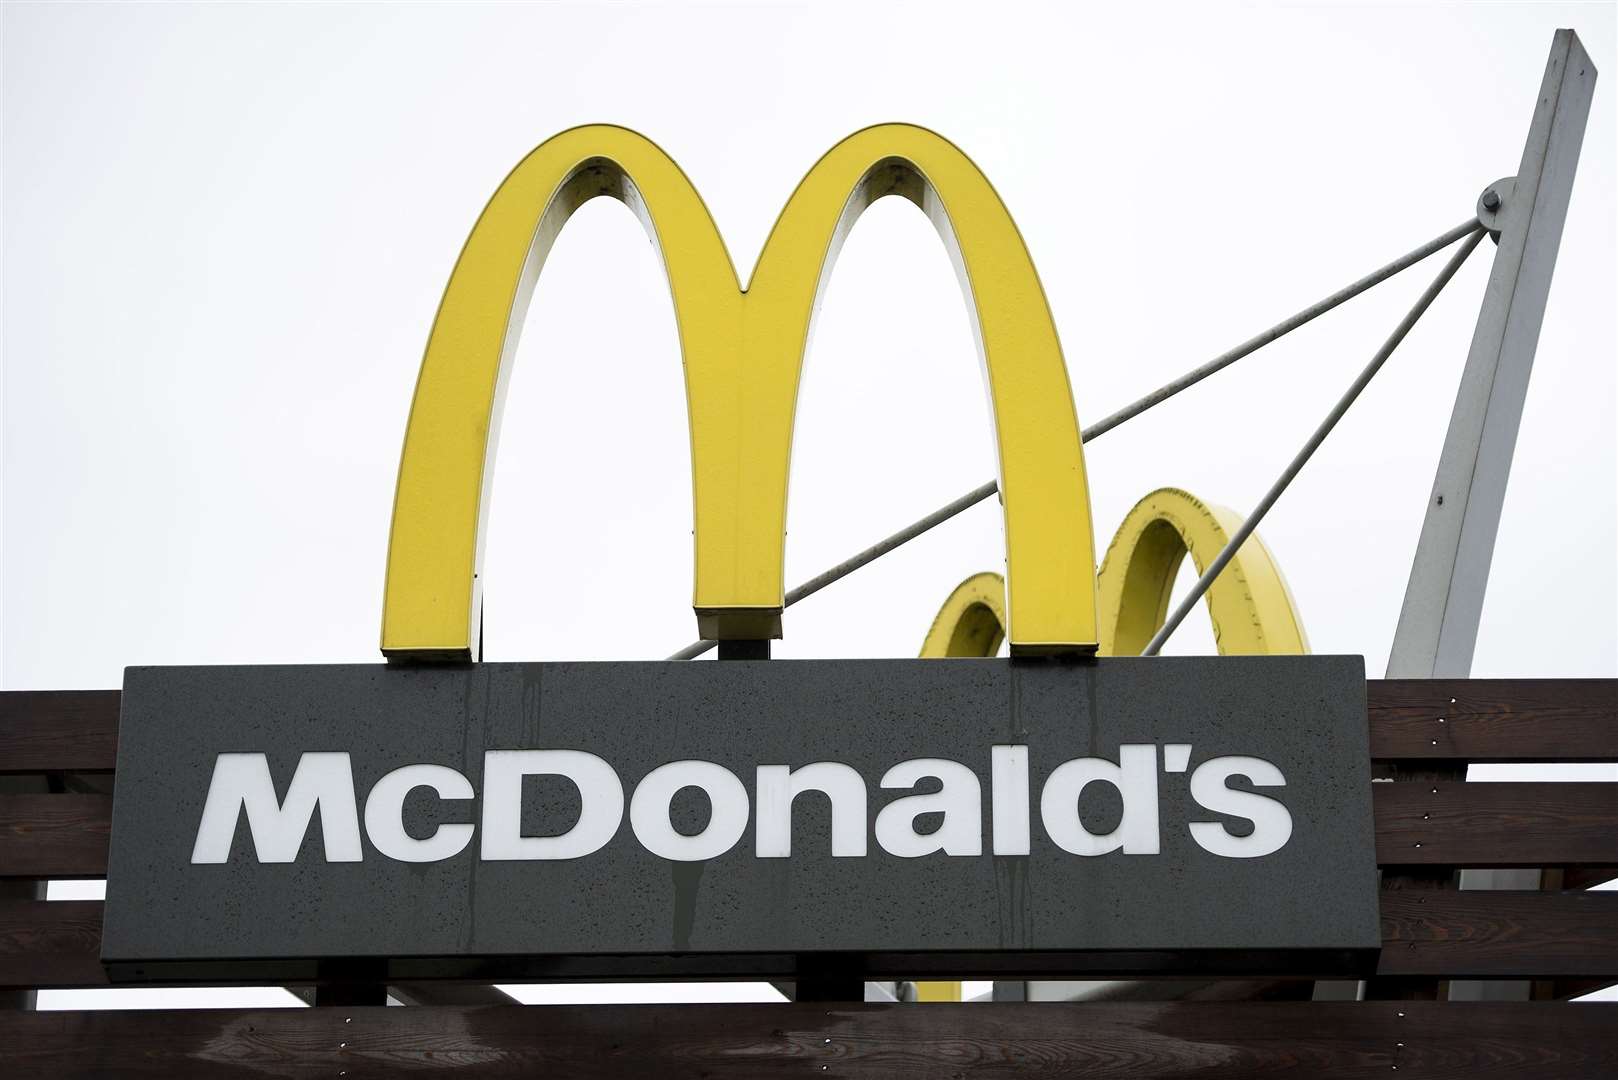 McDonald's is extending its breakfast hours at more than 100 franchises